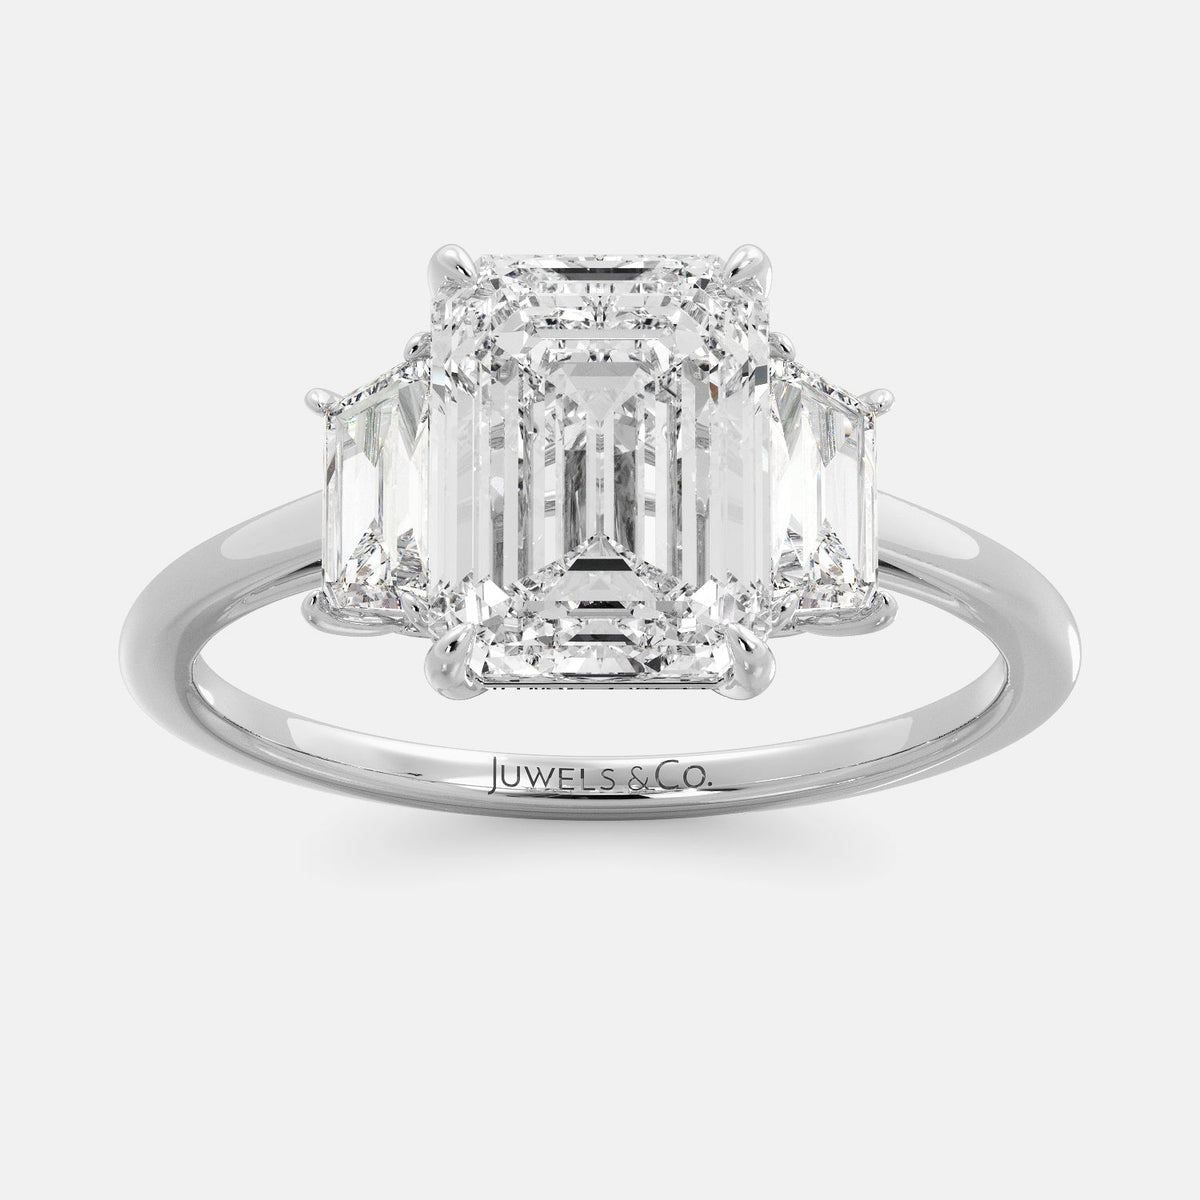 Lab-grown Emerald Cut Diamond Ring with side baguettes, white gold 14K